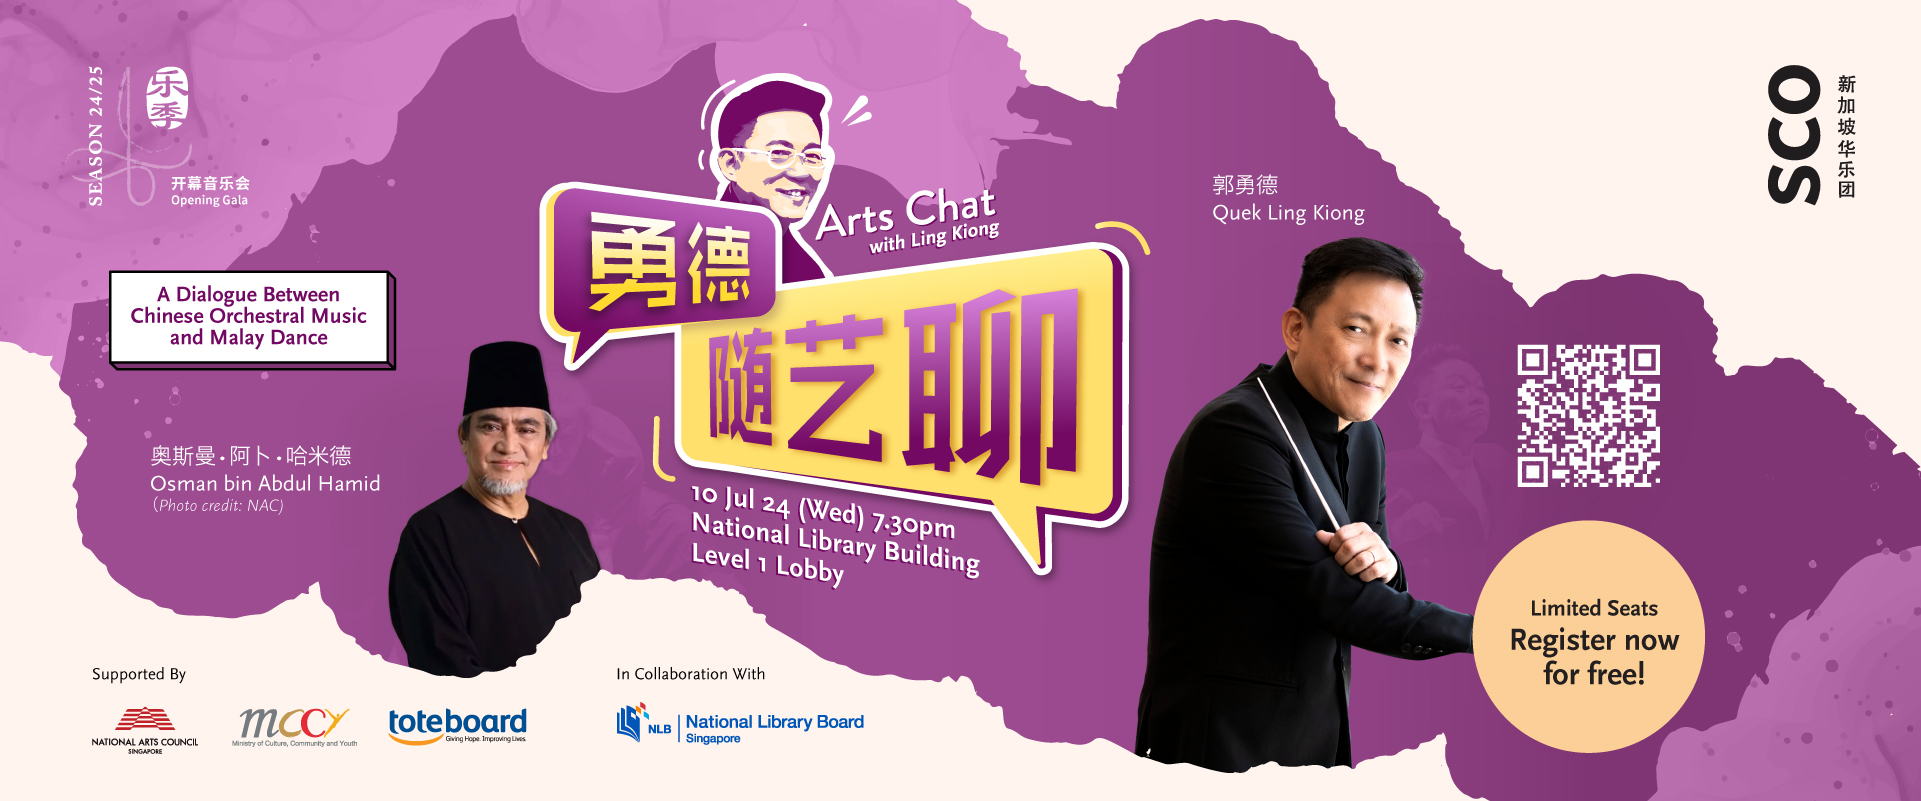 SCO_NLB_Homepage_Website_Digital_Banner_1920x800_v2 Arts Chat with Ling Kiong: A Dialogue between Chinese Orchestral Music and Malay Dance